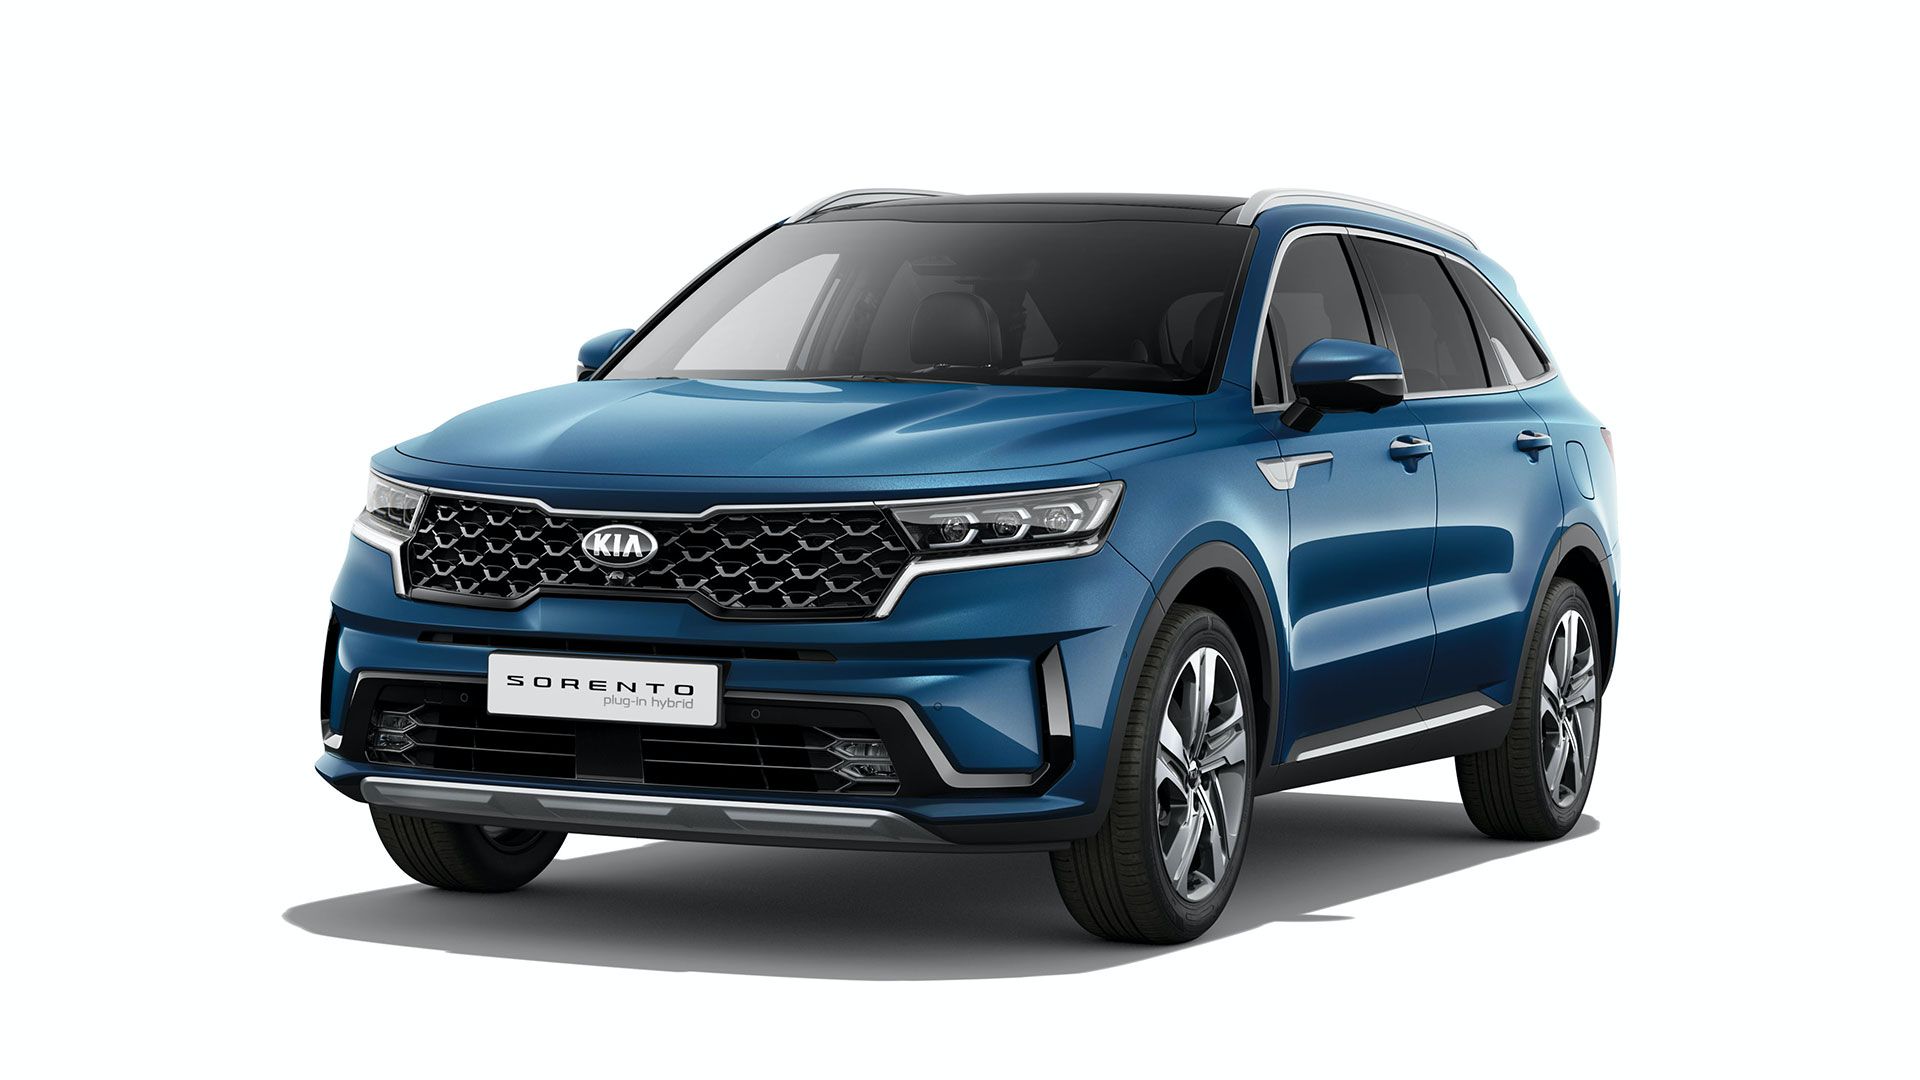 Kia Sorento PHEV Arriving In Europe In Early 2021 As The Cleanest ...